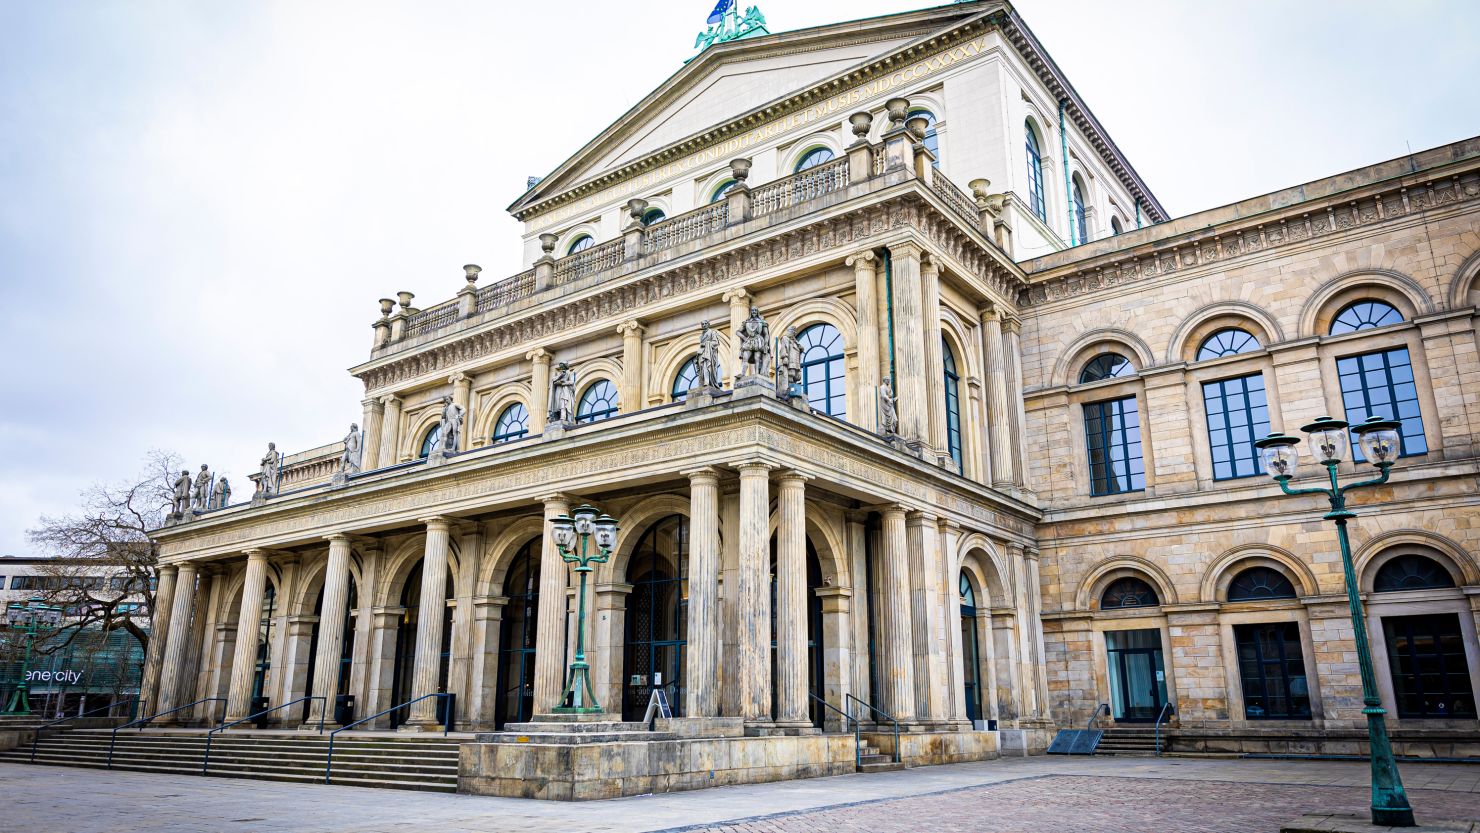 On Monday at the Hanover Opera House in Frankfurt, Germany, ballet director Marco Goecke smeared a dance critic with dog excrement after she gave him a negative review.